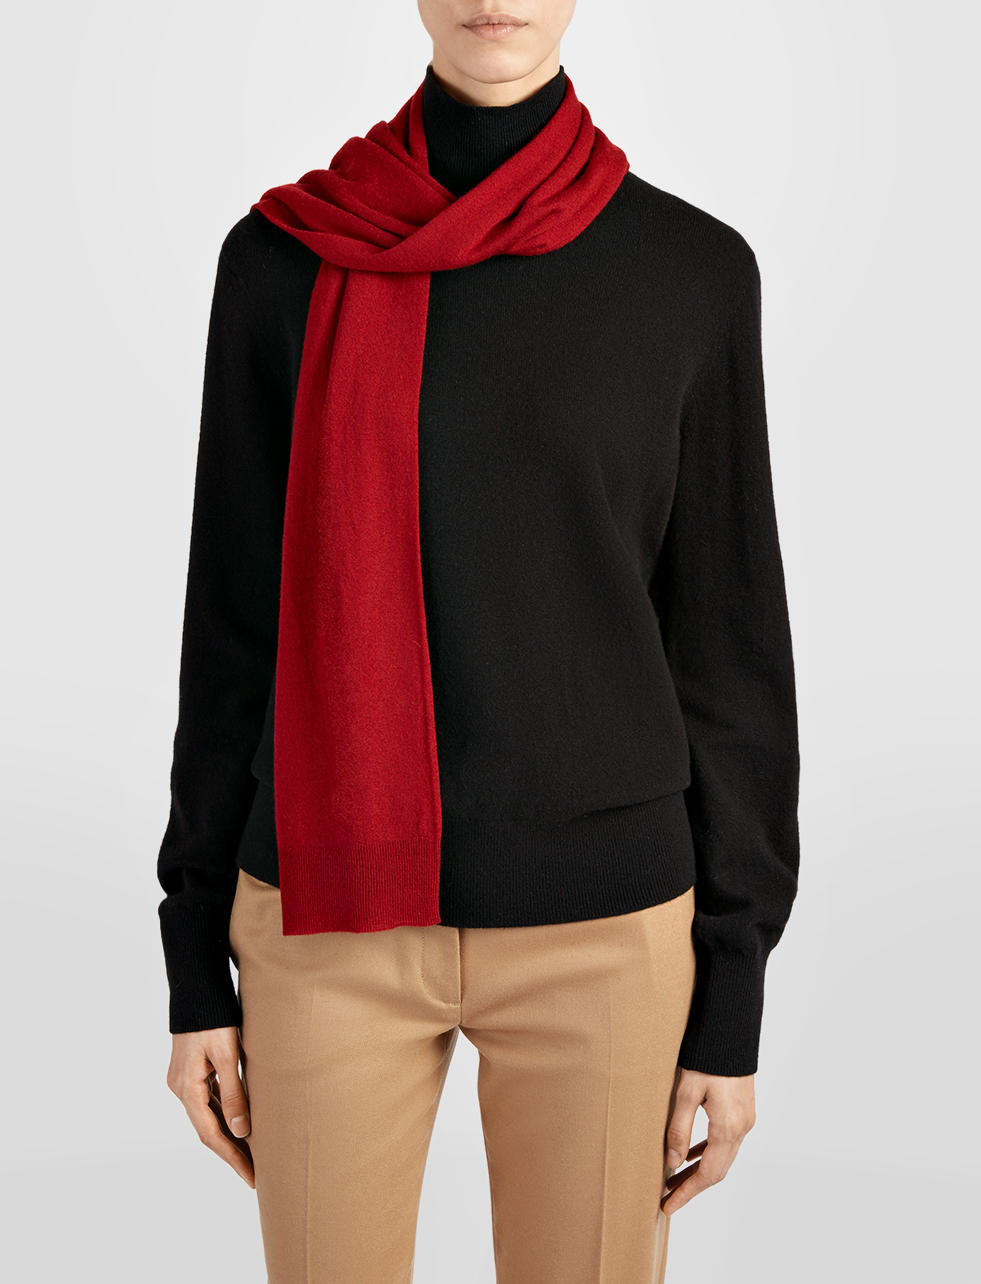 JOSEPH Cashmere Cashair Tube Scarf in Ruby (Red) - Lyst